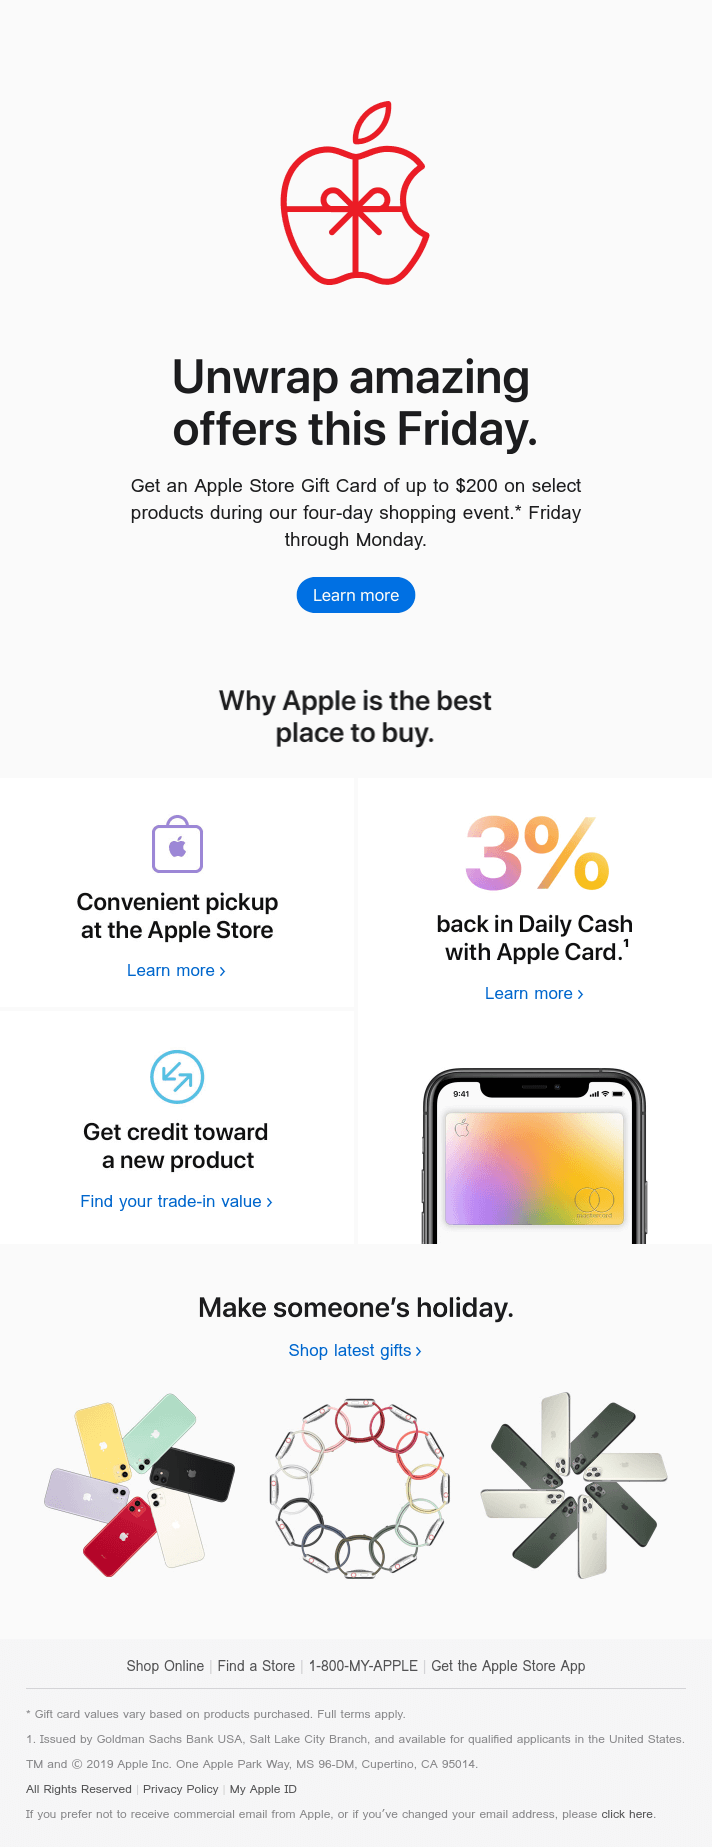 Get an Apple Store Gift Card of up to $200. Starting this Friday.